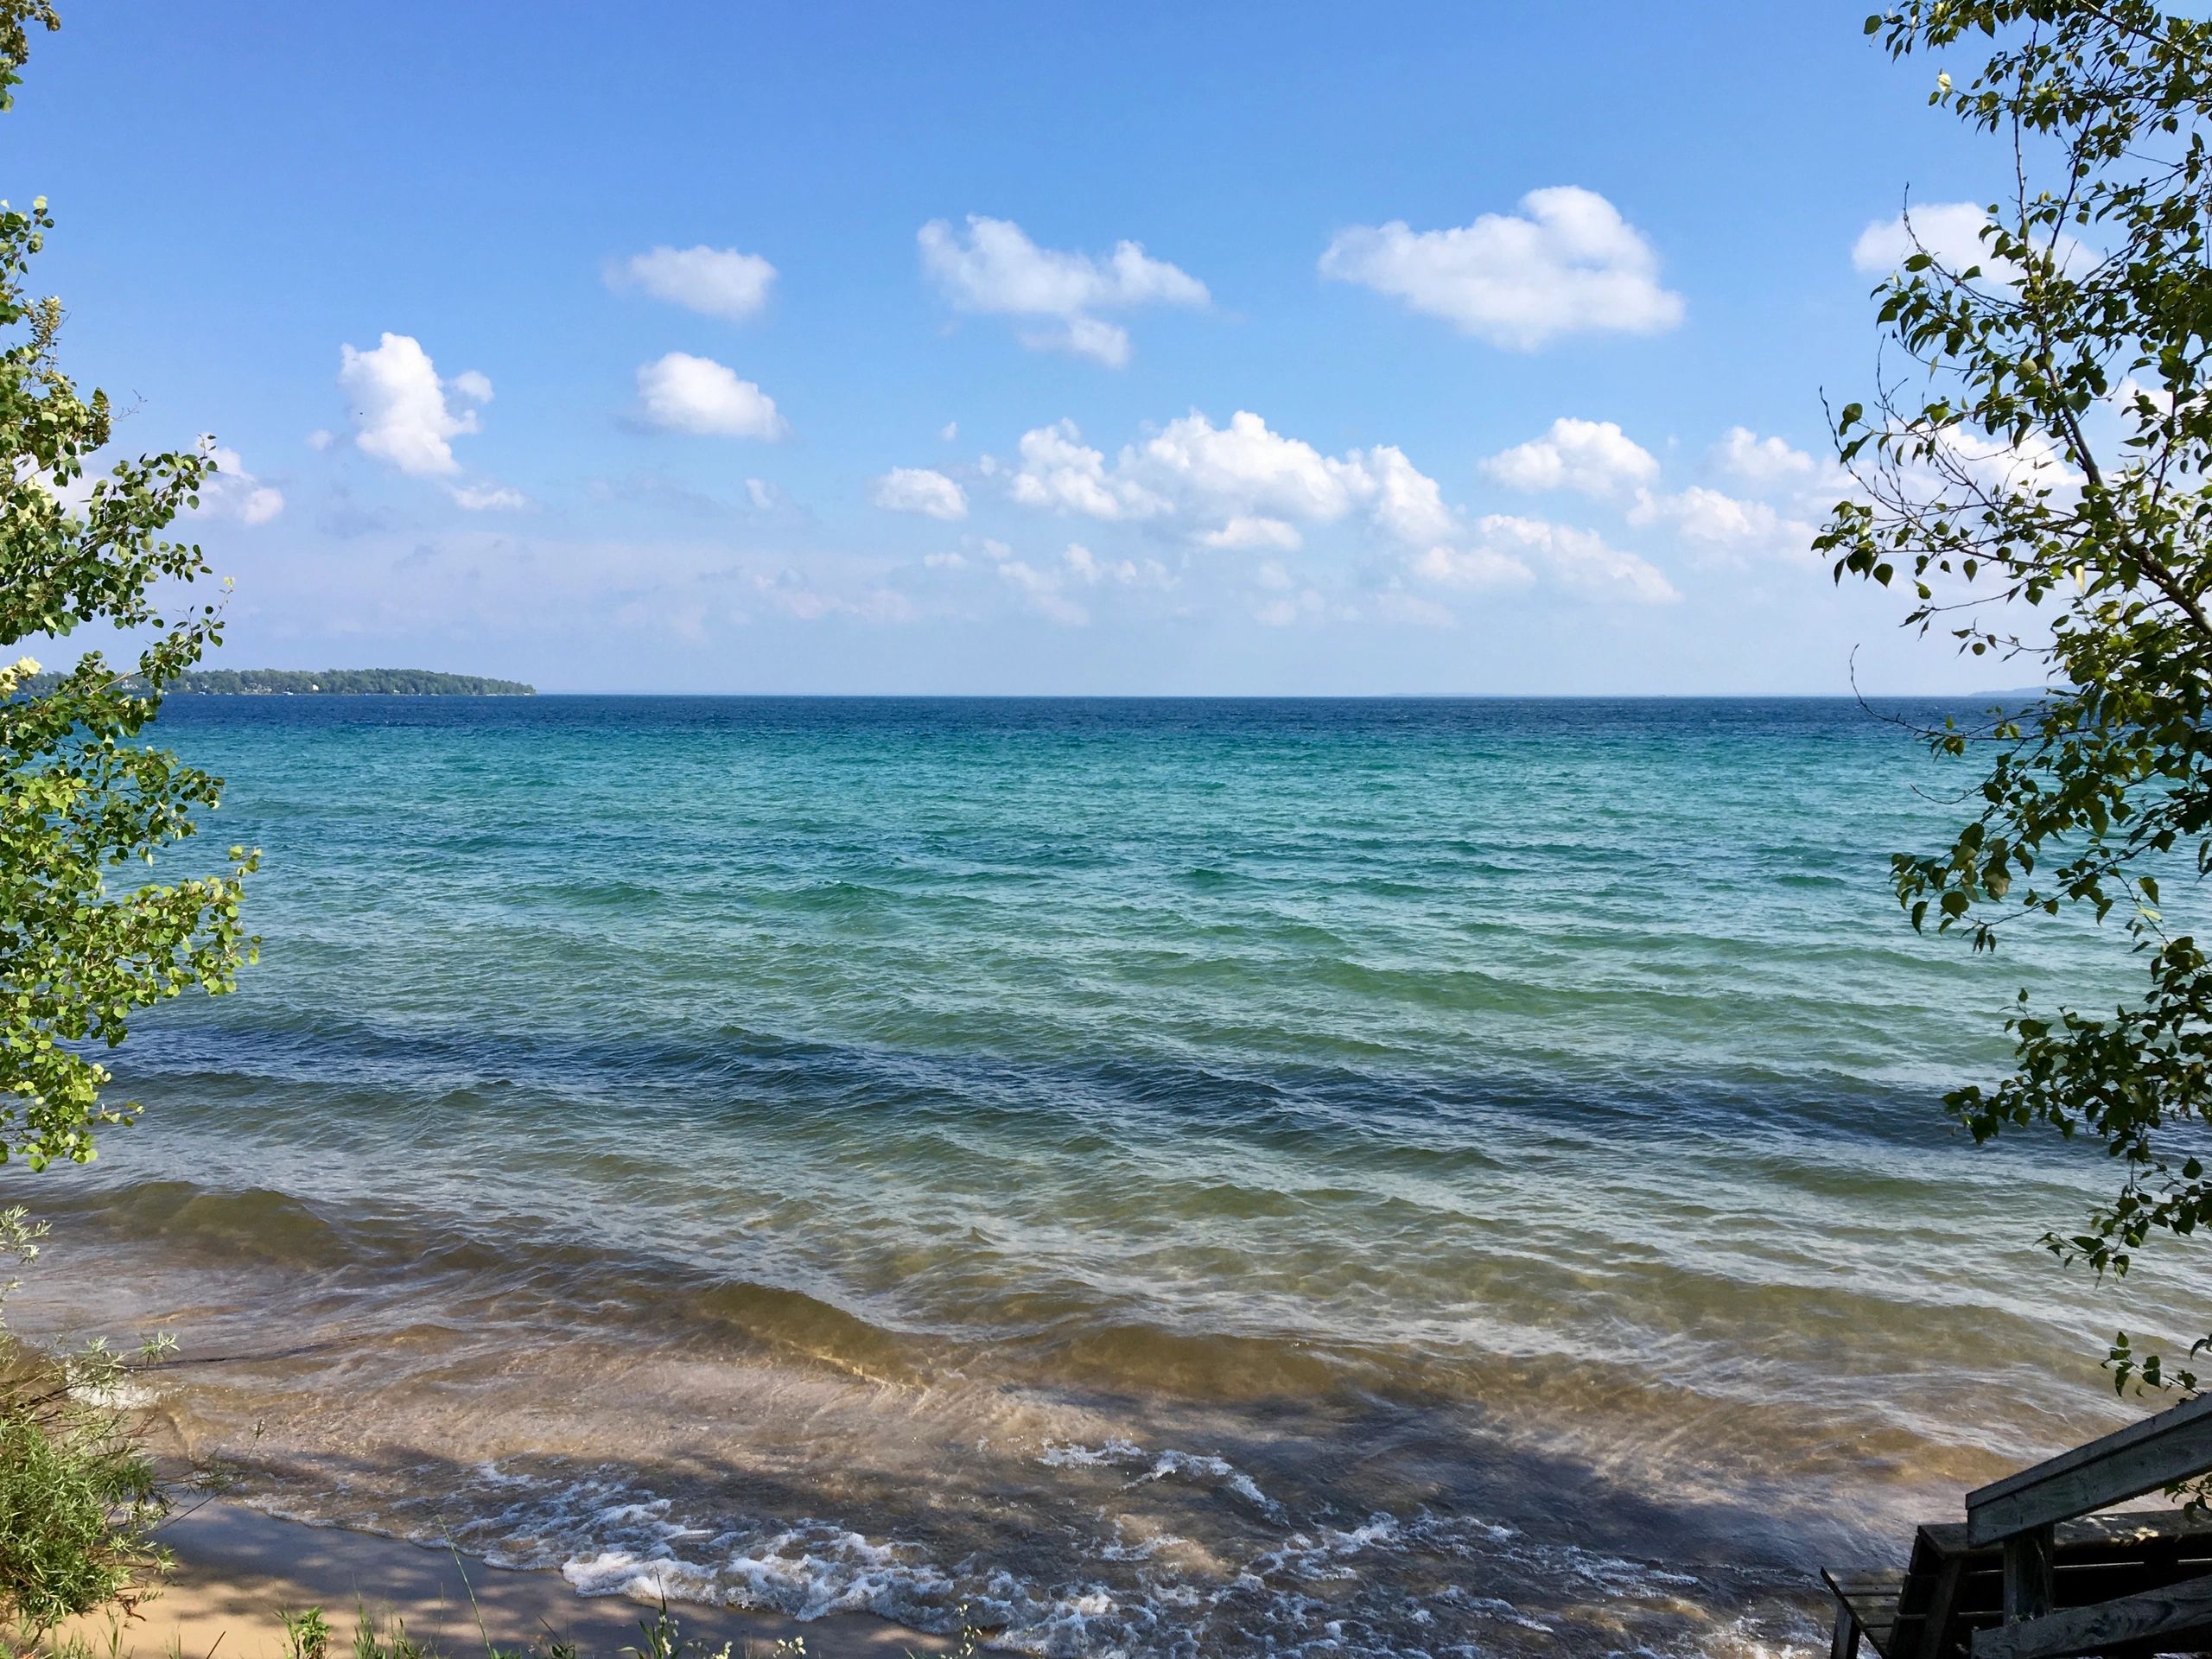 Grand Traverse Bay, Lake Michigan, a source of inspiration for our car window decals, hats, shirts.